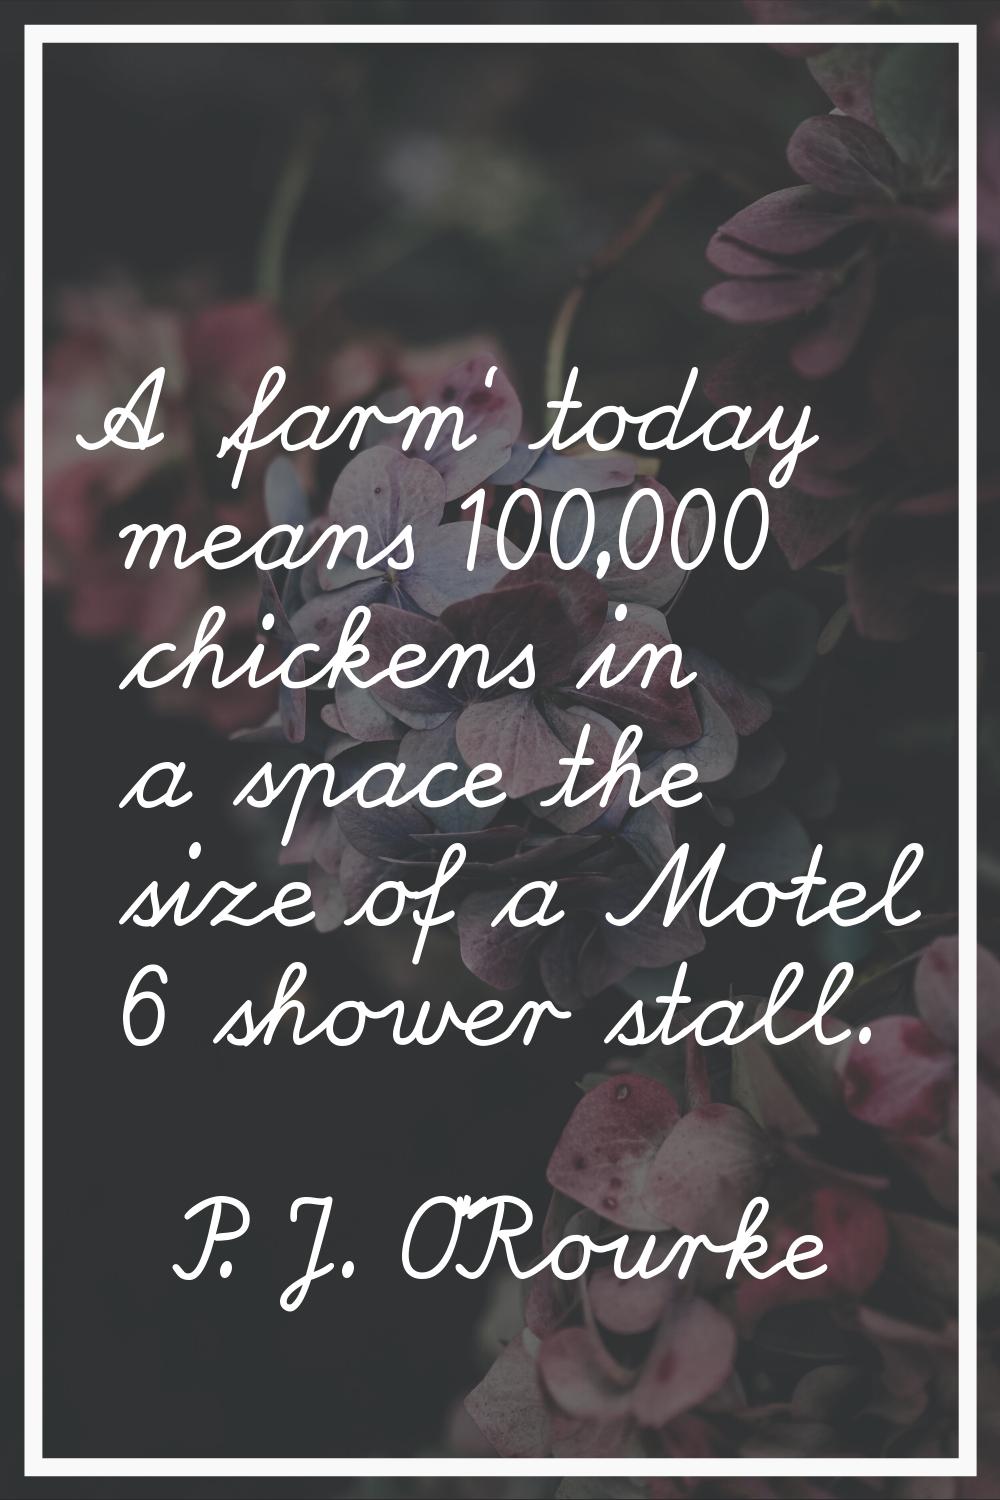 A 'farm' today means 100,000 chickens in a space the size of a Motel 6 shower stall.